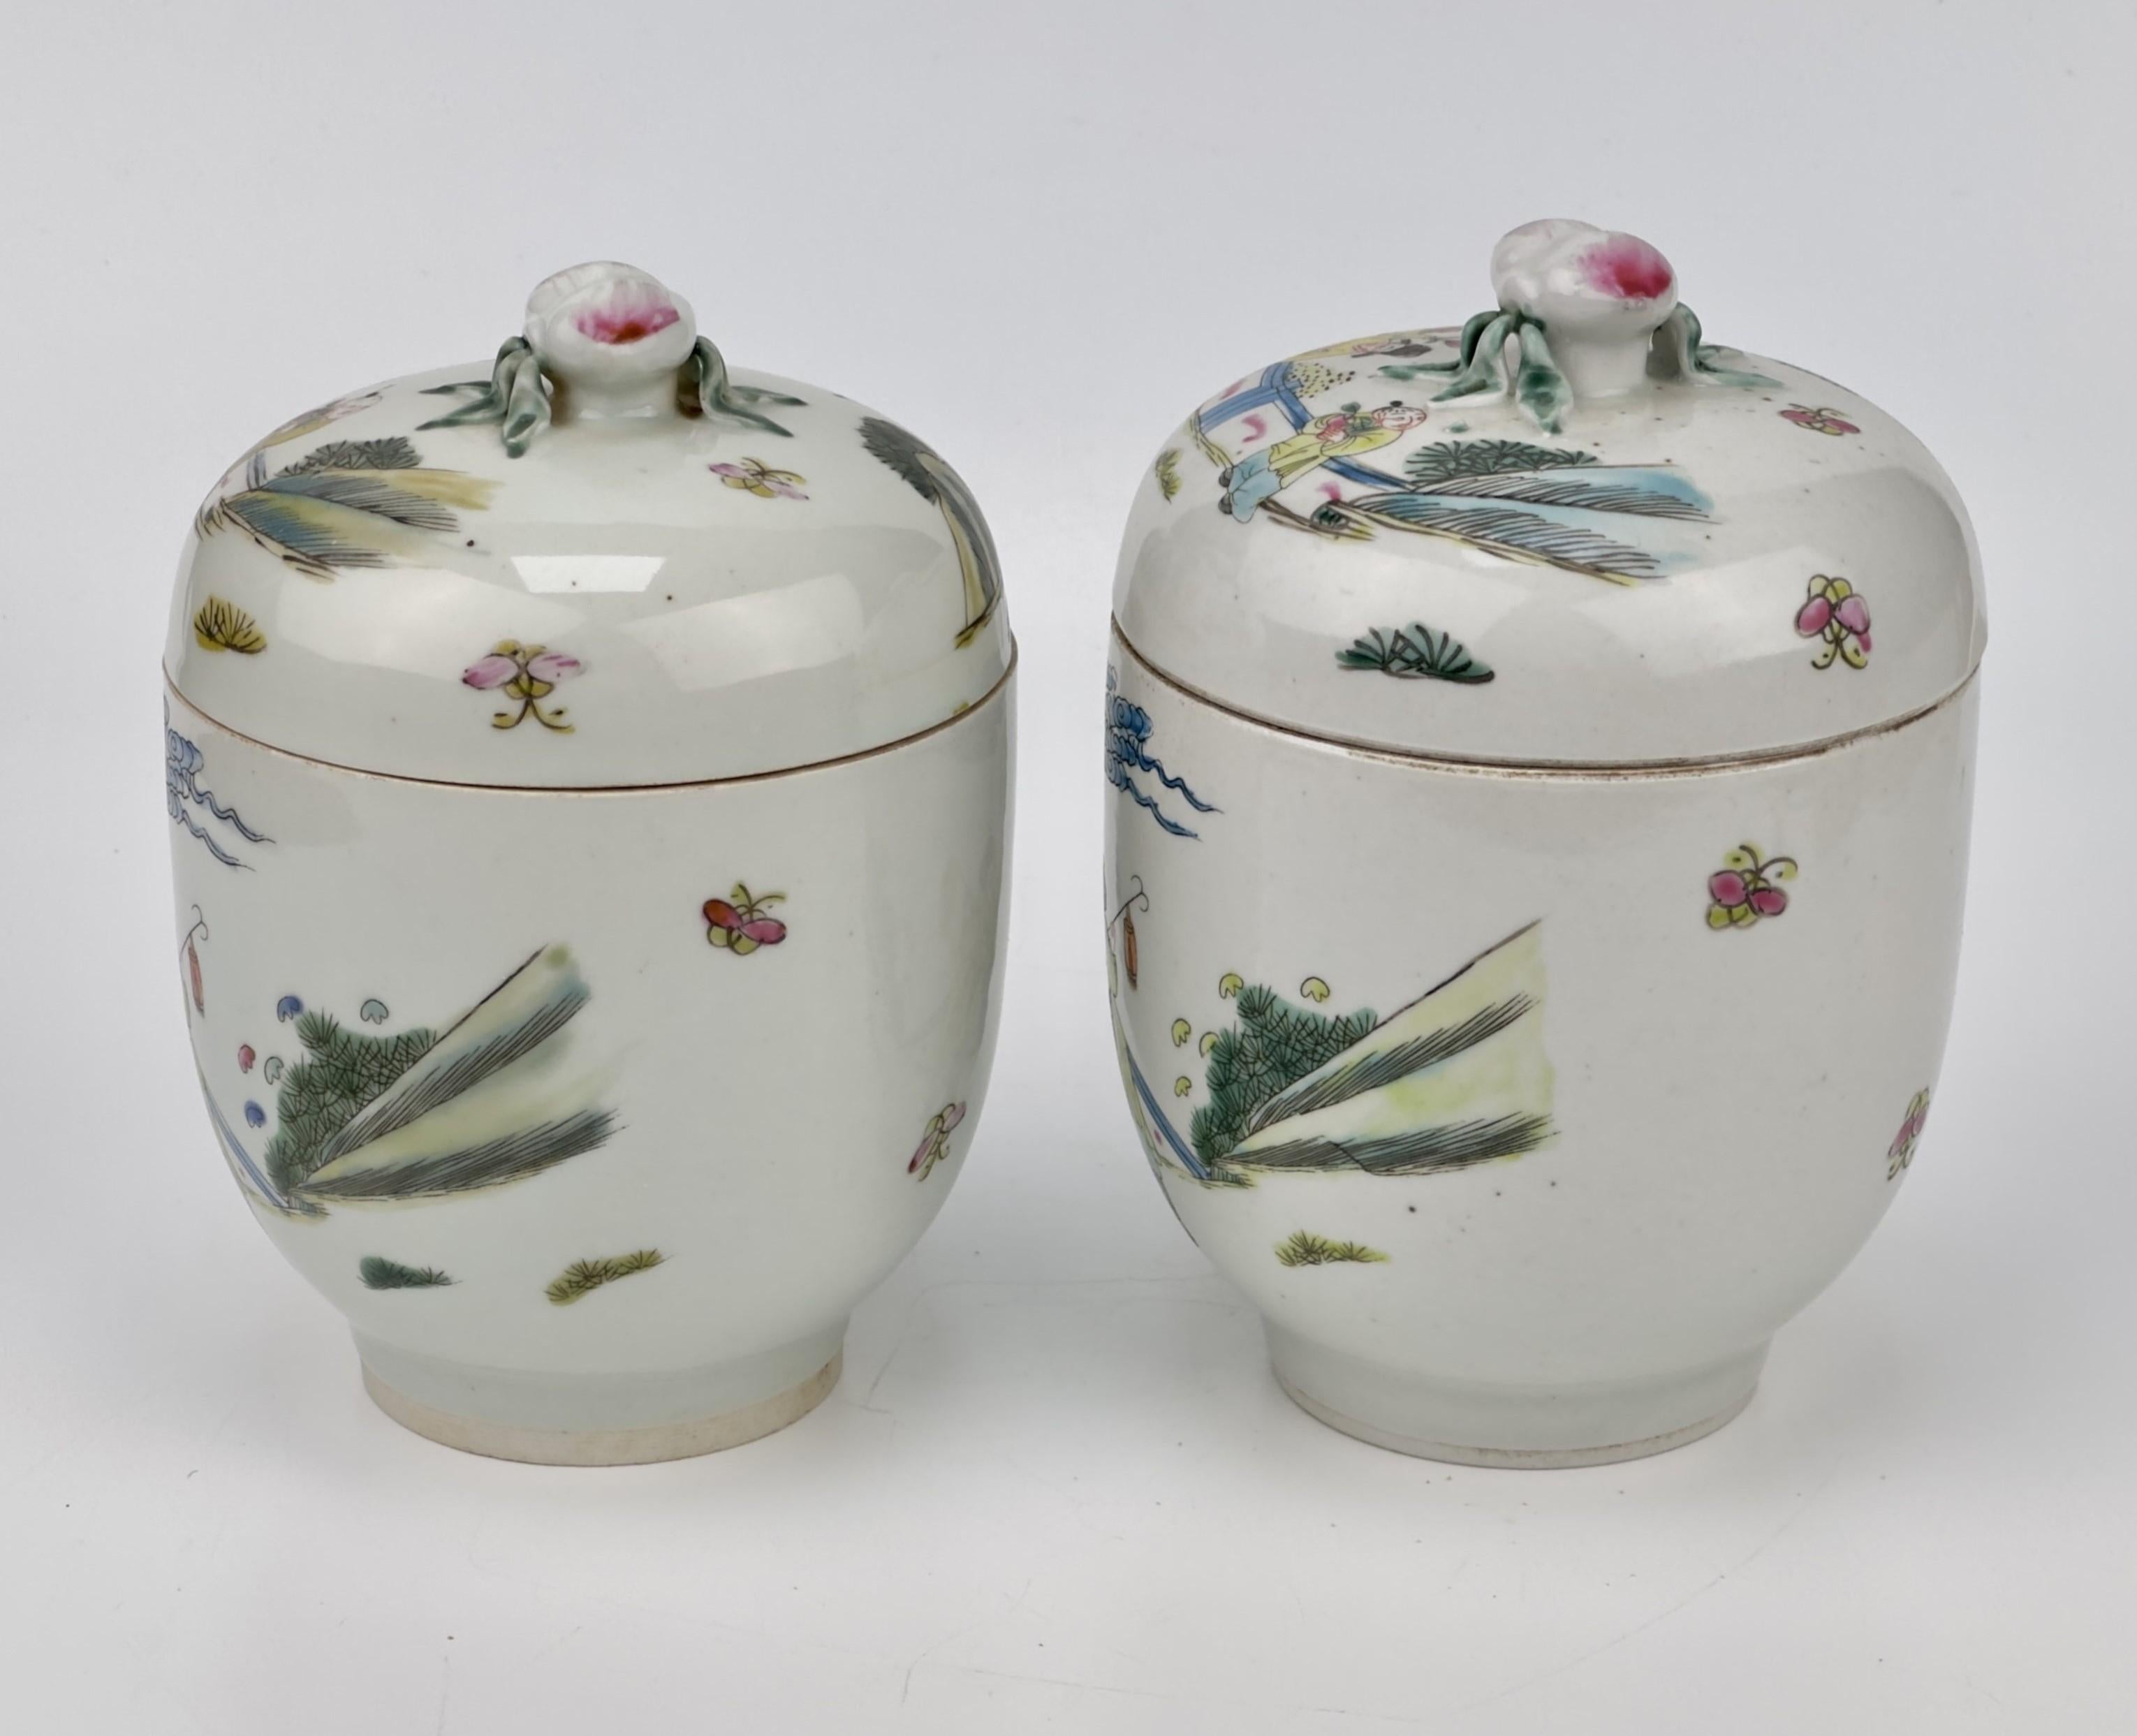 Two Chinese Famille Verte Jars with Horseback Riding, Qing Period, Tongzhi Era For Sale 6